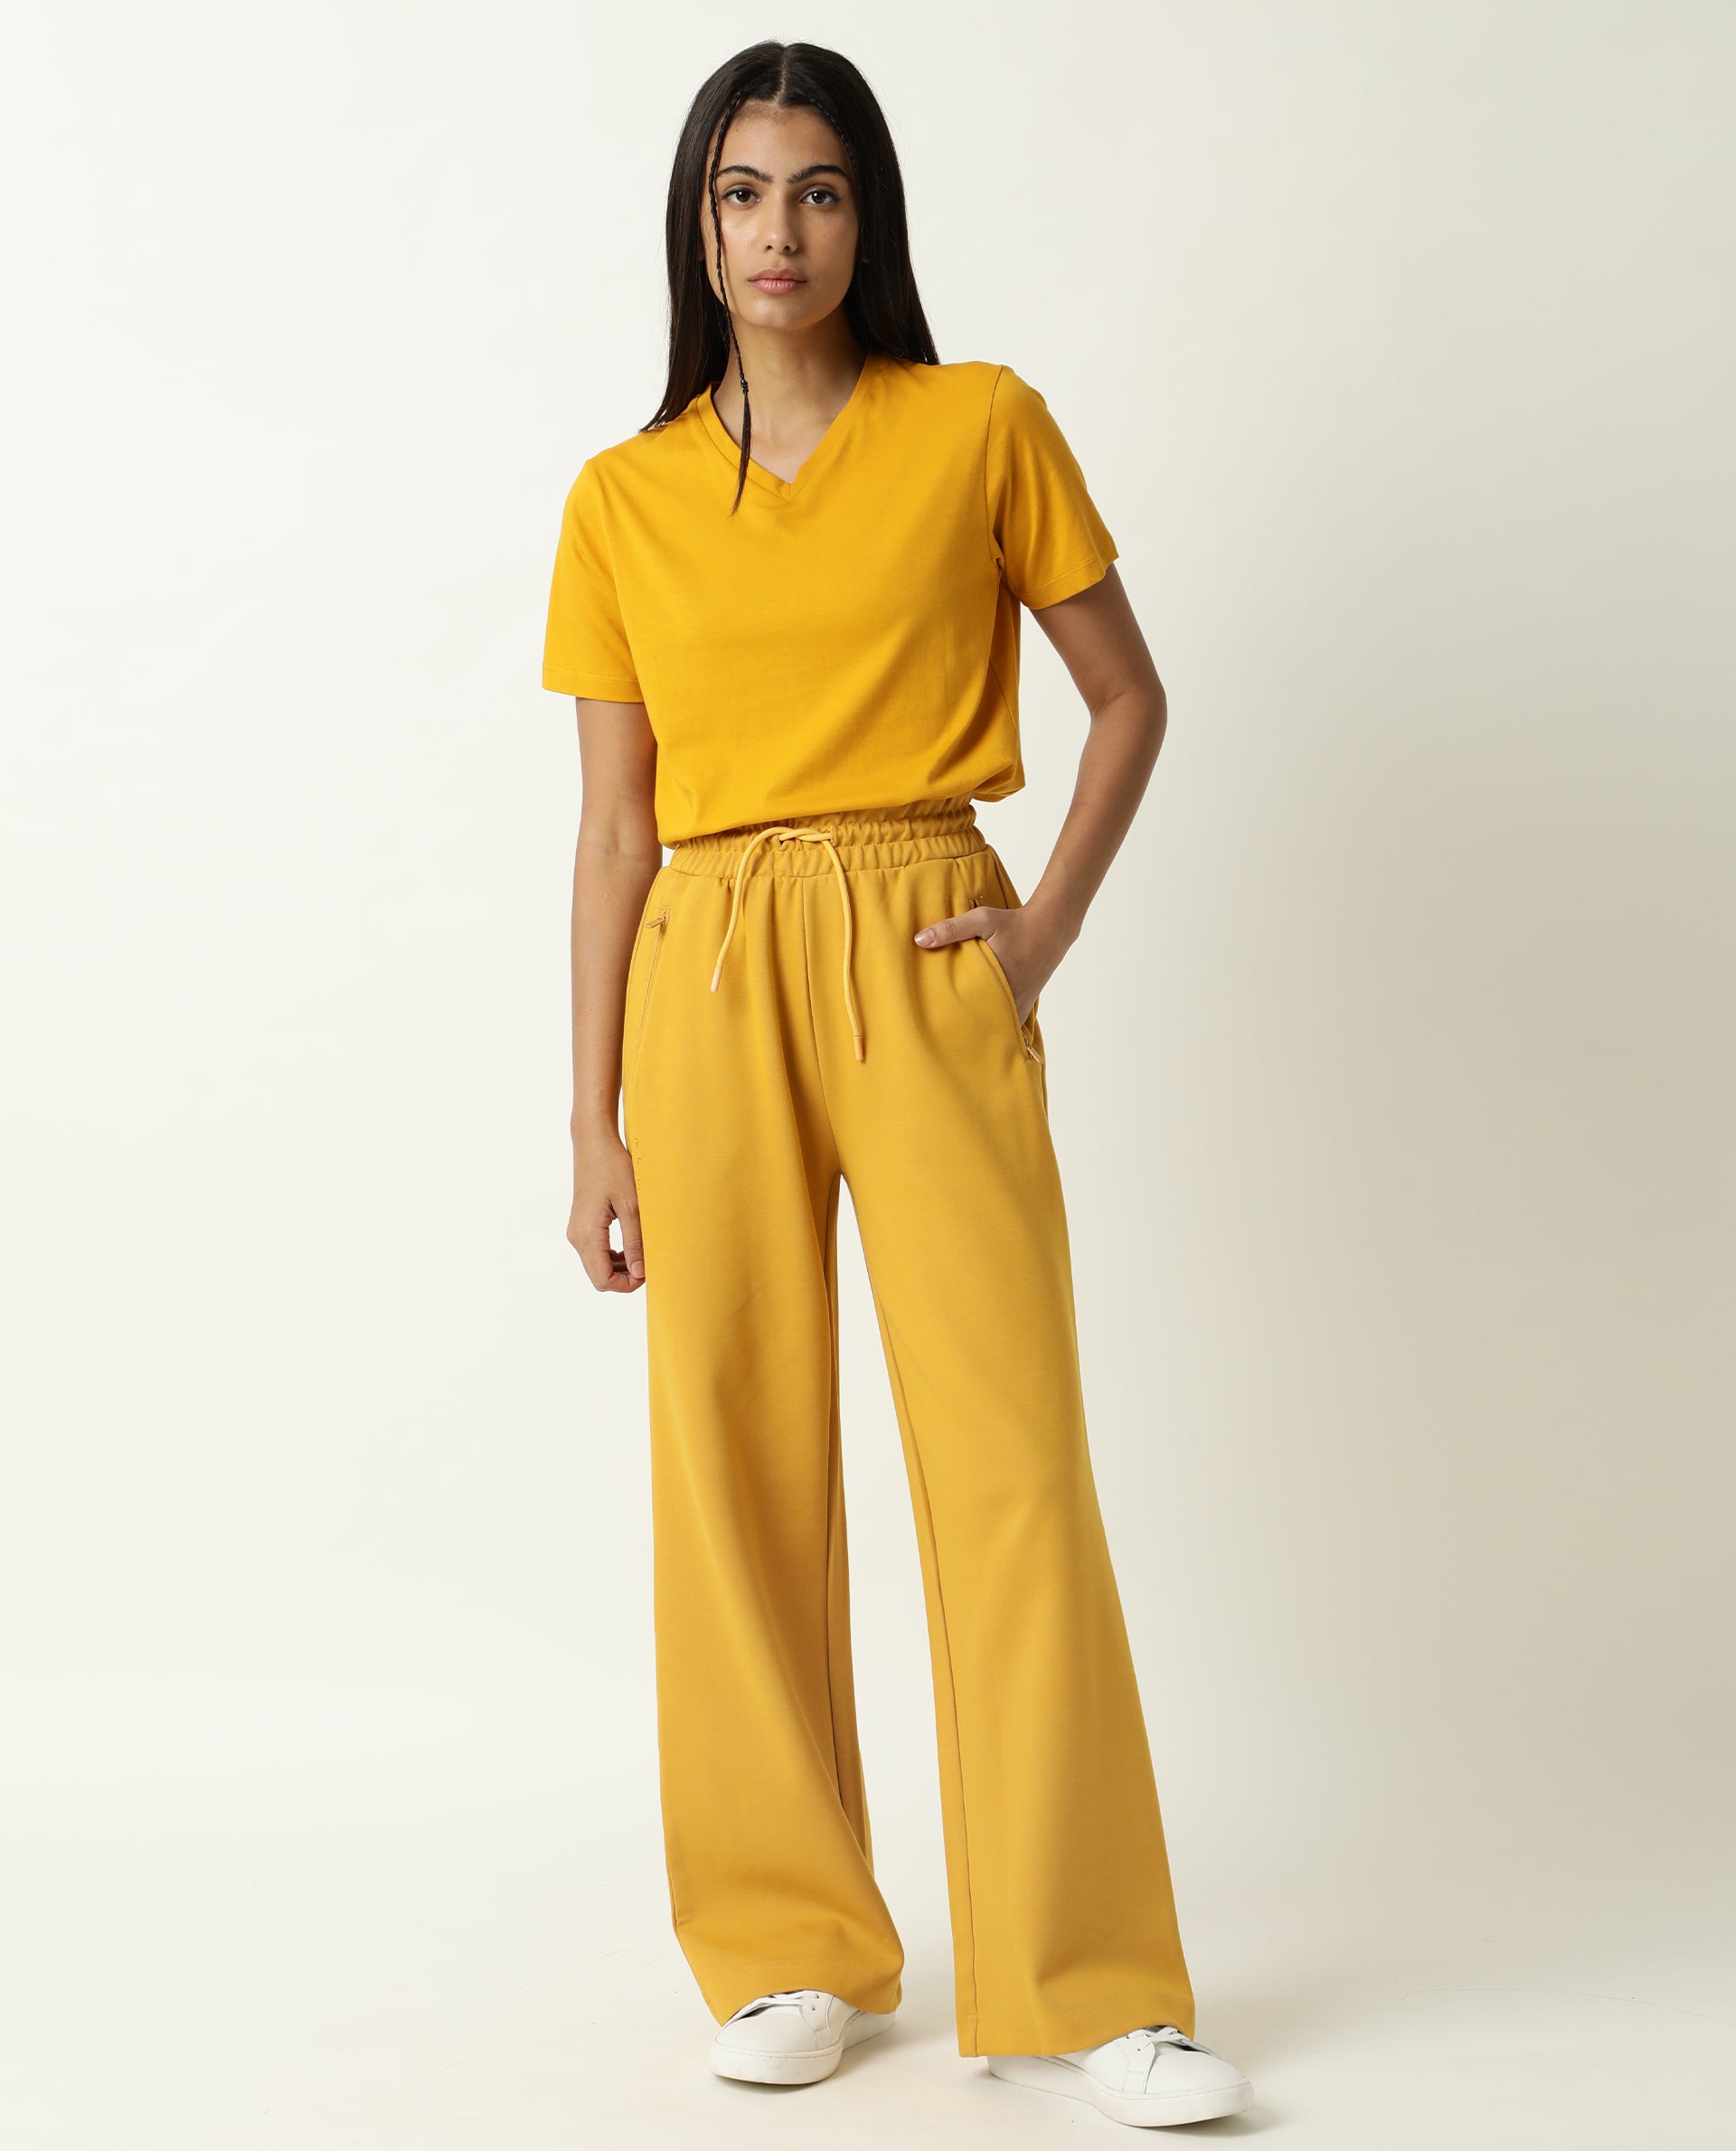 Flair Fringe Pants For Women In Suede Mustard with Floral Cutouts